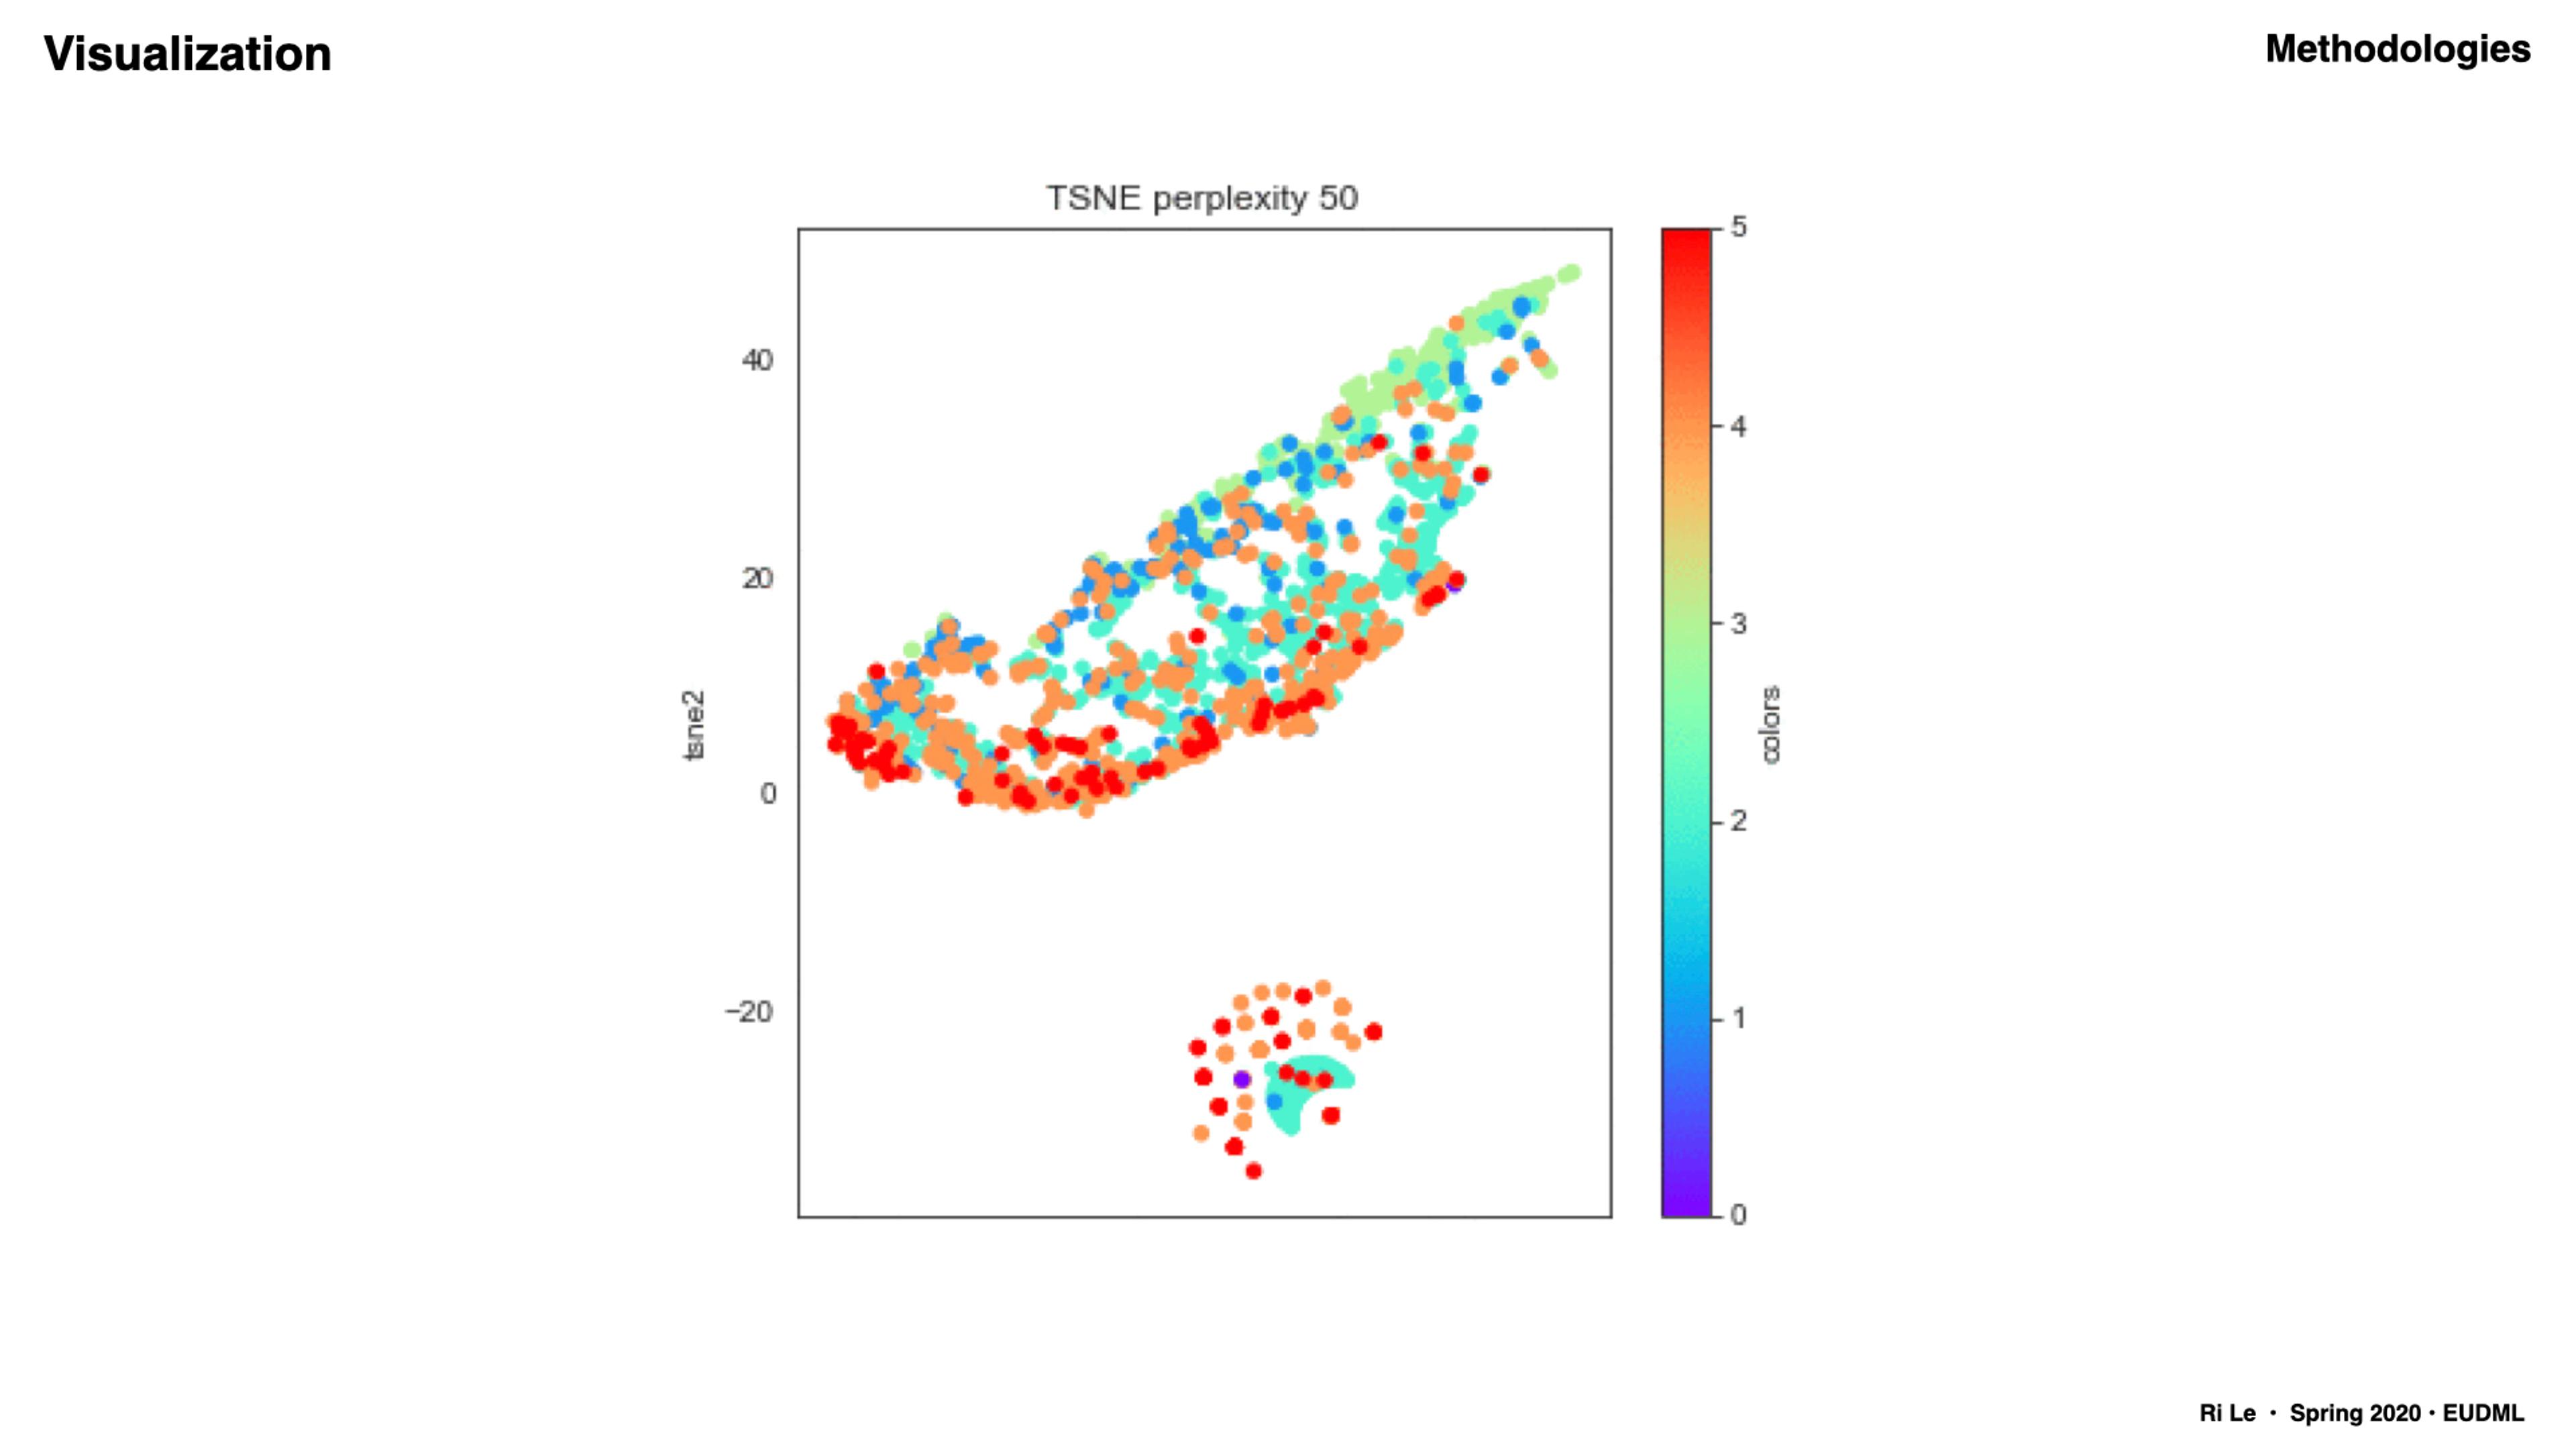 Attempts to compare TSNE with HDBSCAN clustering outputs